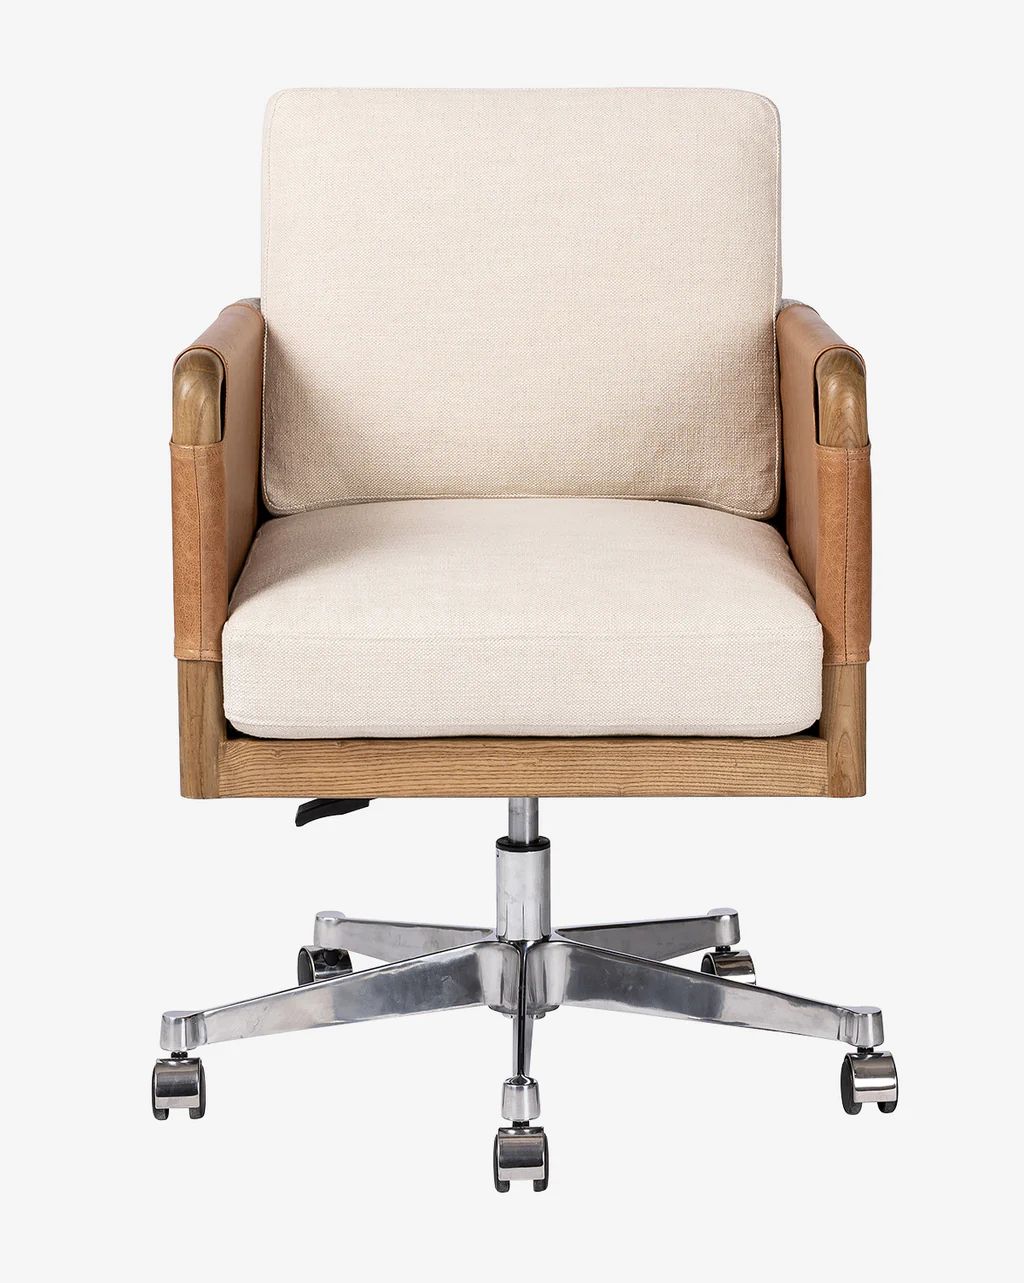 Olindo Desk Chair | McGee & Co.